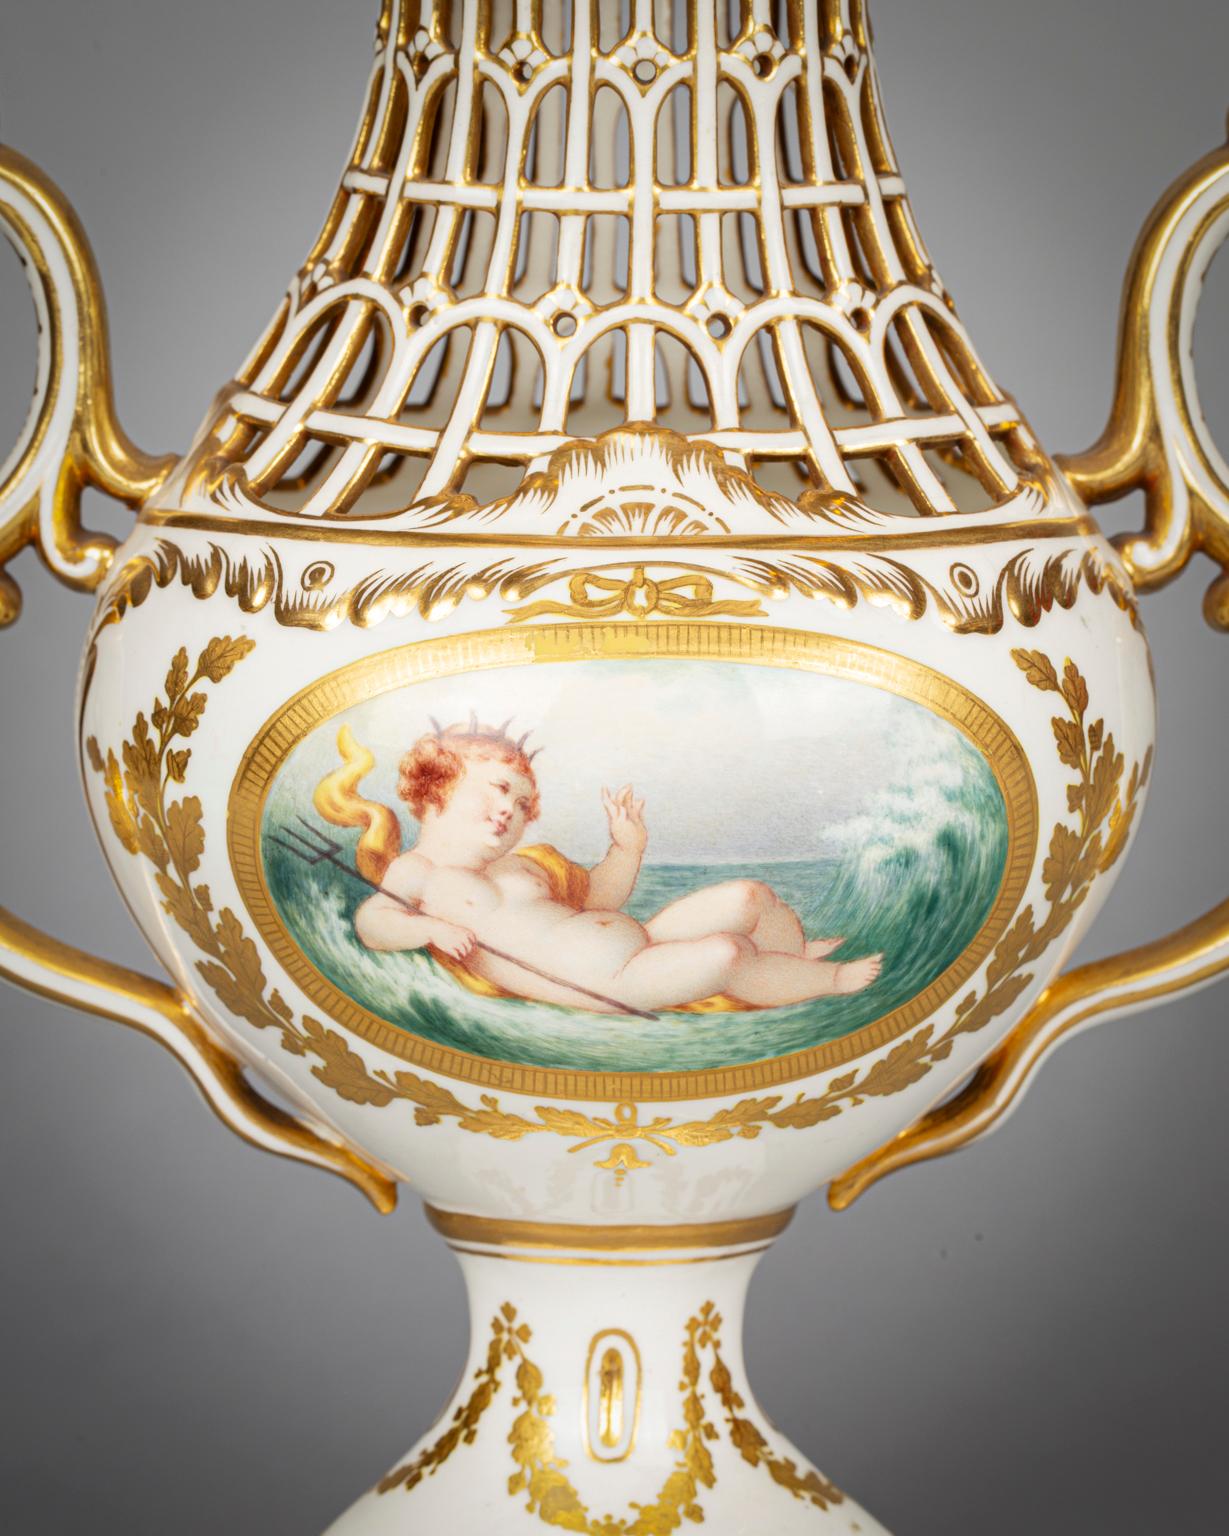 Of egg-shell porcelain in Sevres and/or Chelsea style, with four panels of finely painted of Putti in various pursuits, the shoulder and cover with interlaced openwork, dolphin finials. Condition: one inner flange of cover with minor damage.